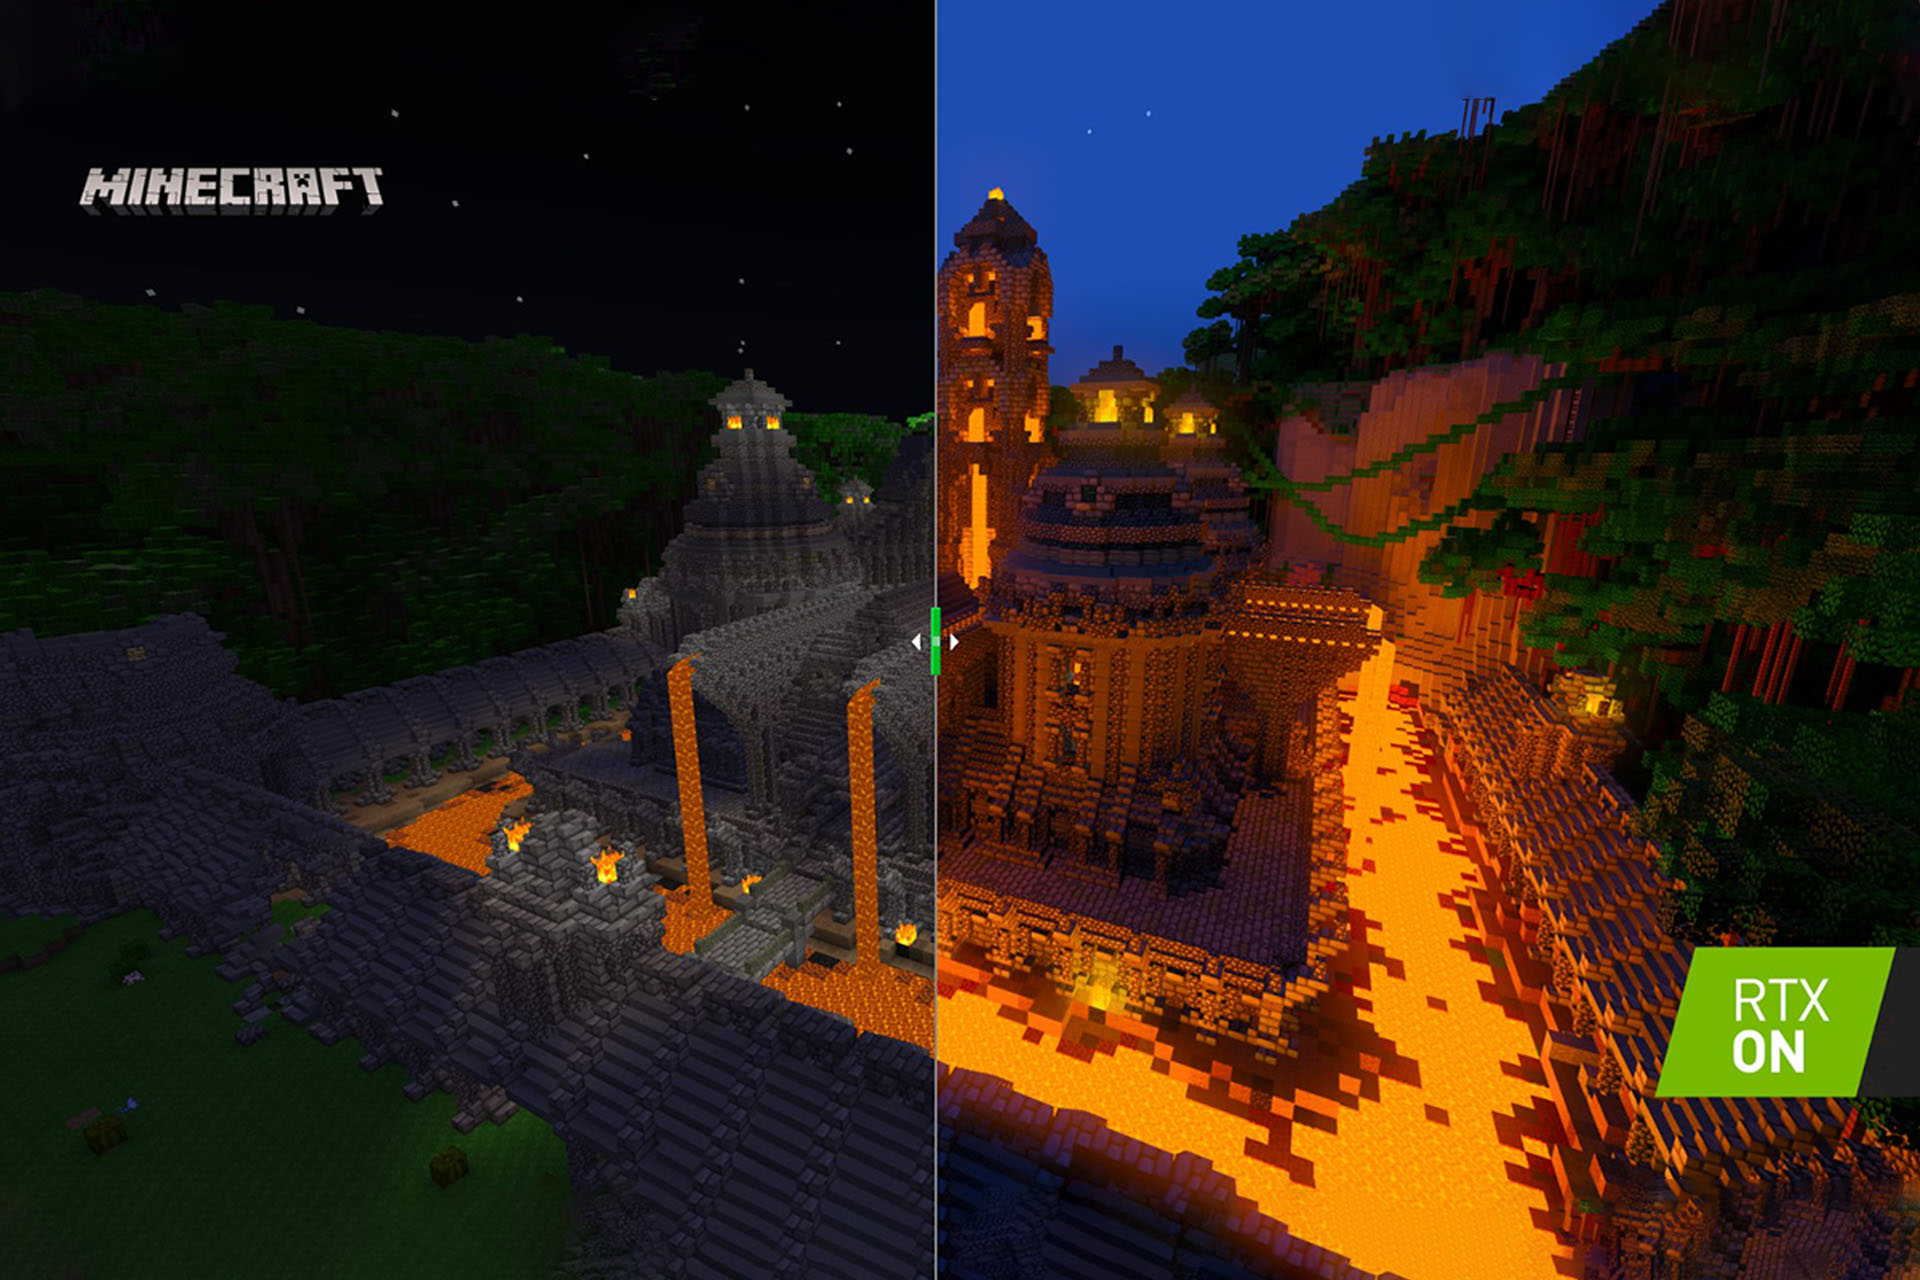 Found a way to allow RTX ray tracing on any world, so I converted my Java  survival world to bedrock, so here's the comparison between Bedrock RTX ON  vs Java SEUS E12